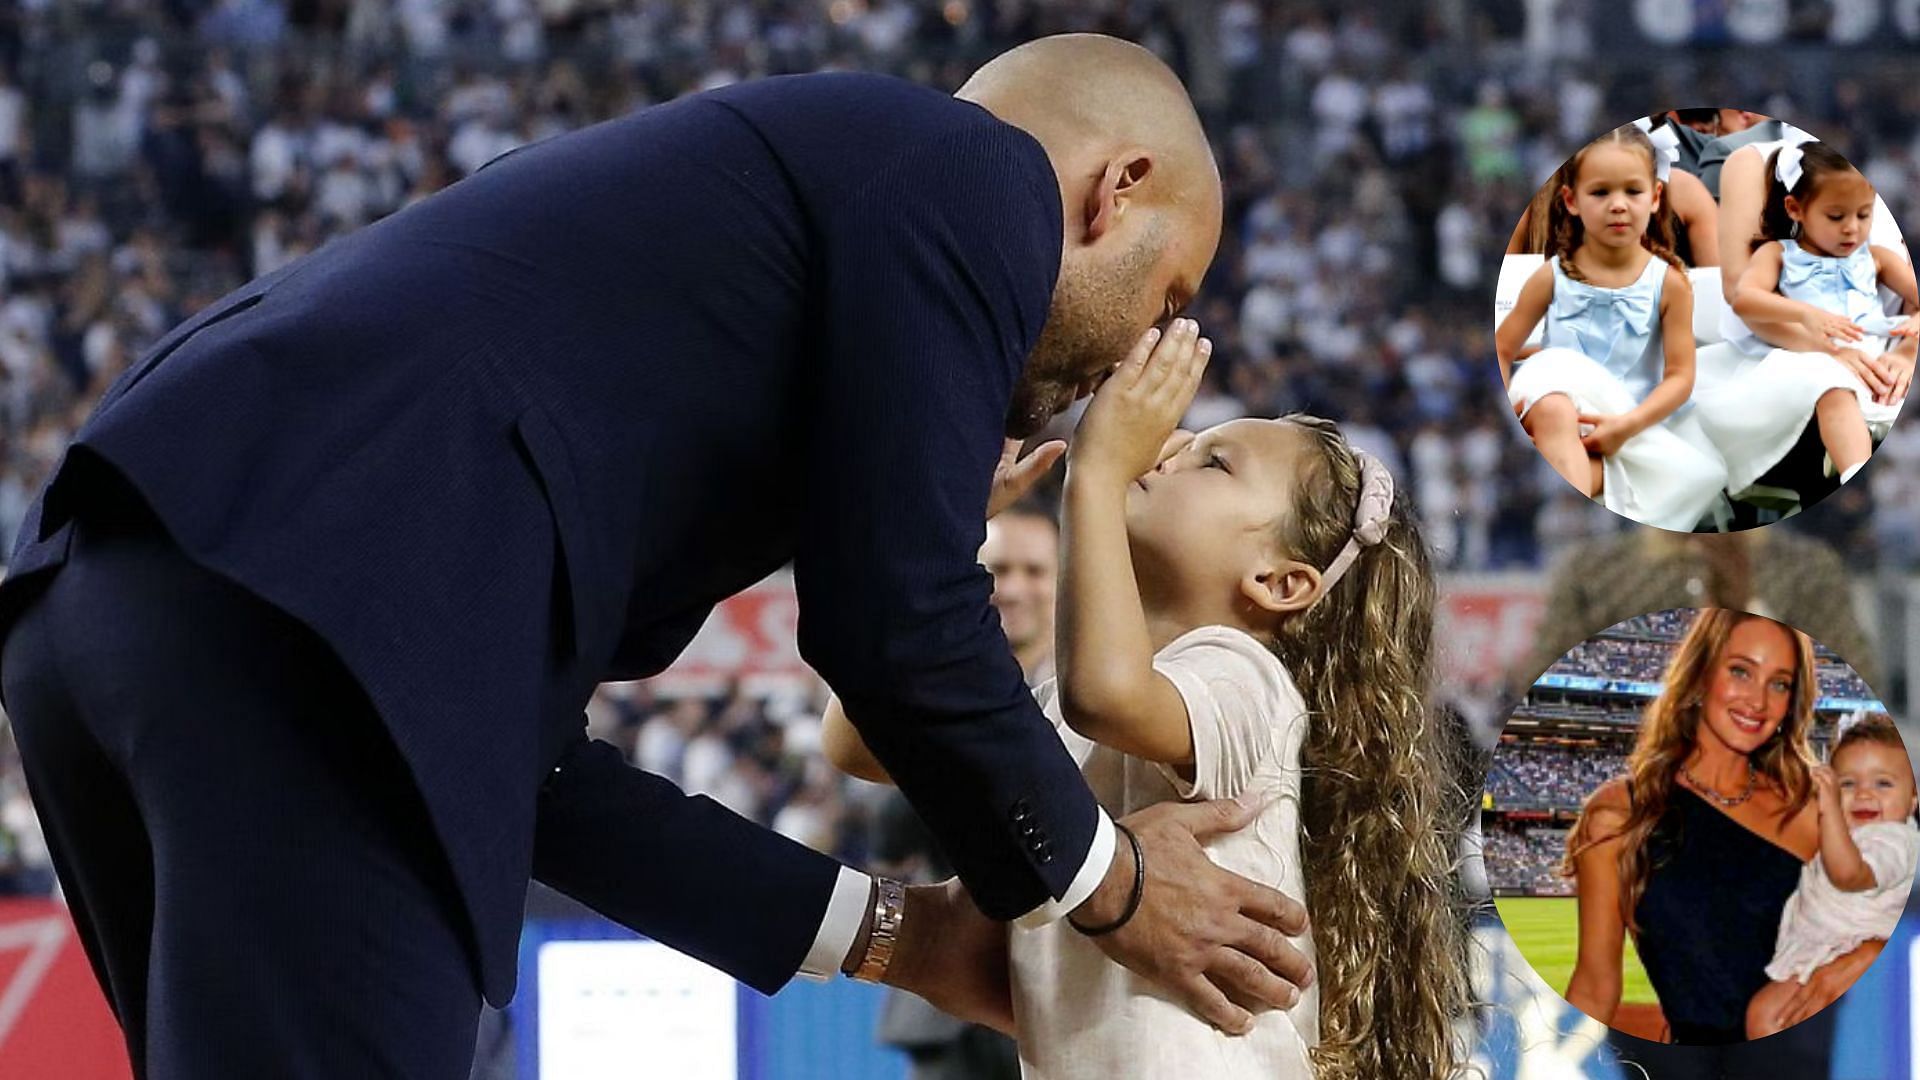 NEW YORK, NEW YORK - SEPTEMBER 09: Baseball Hall of famer Derek Jeter kisses his daughter Bella as he is honored by the New York Yankees before a game against the Tampa Bay Rays at Yankee Stadium on September 09, 2022 in the Bronx borough of New York City. (Photo by Jim McIsaac/Getty Images)